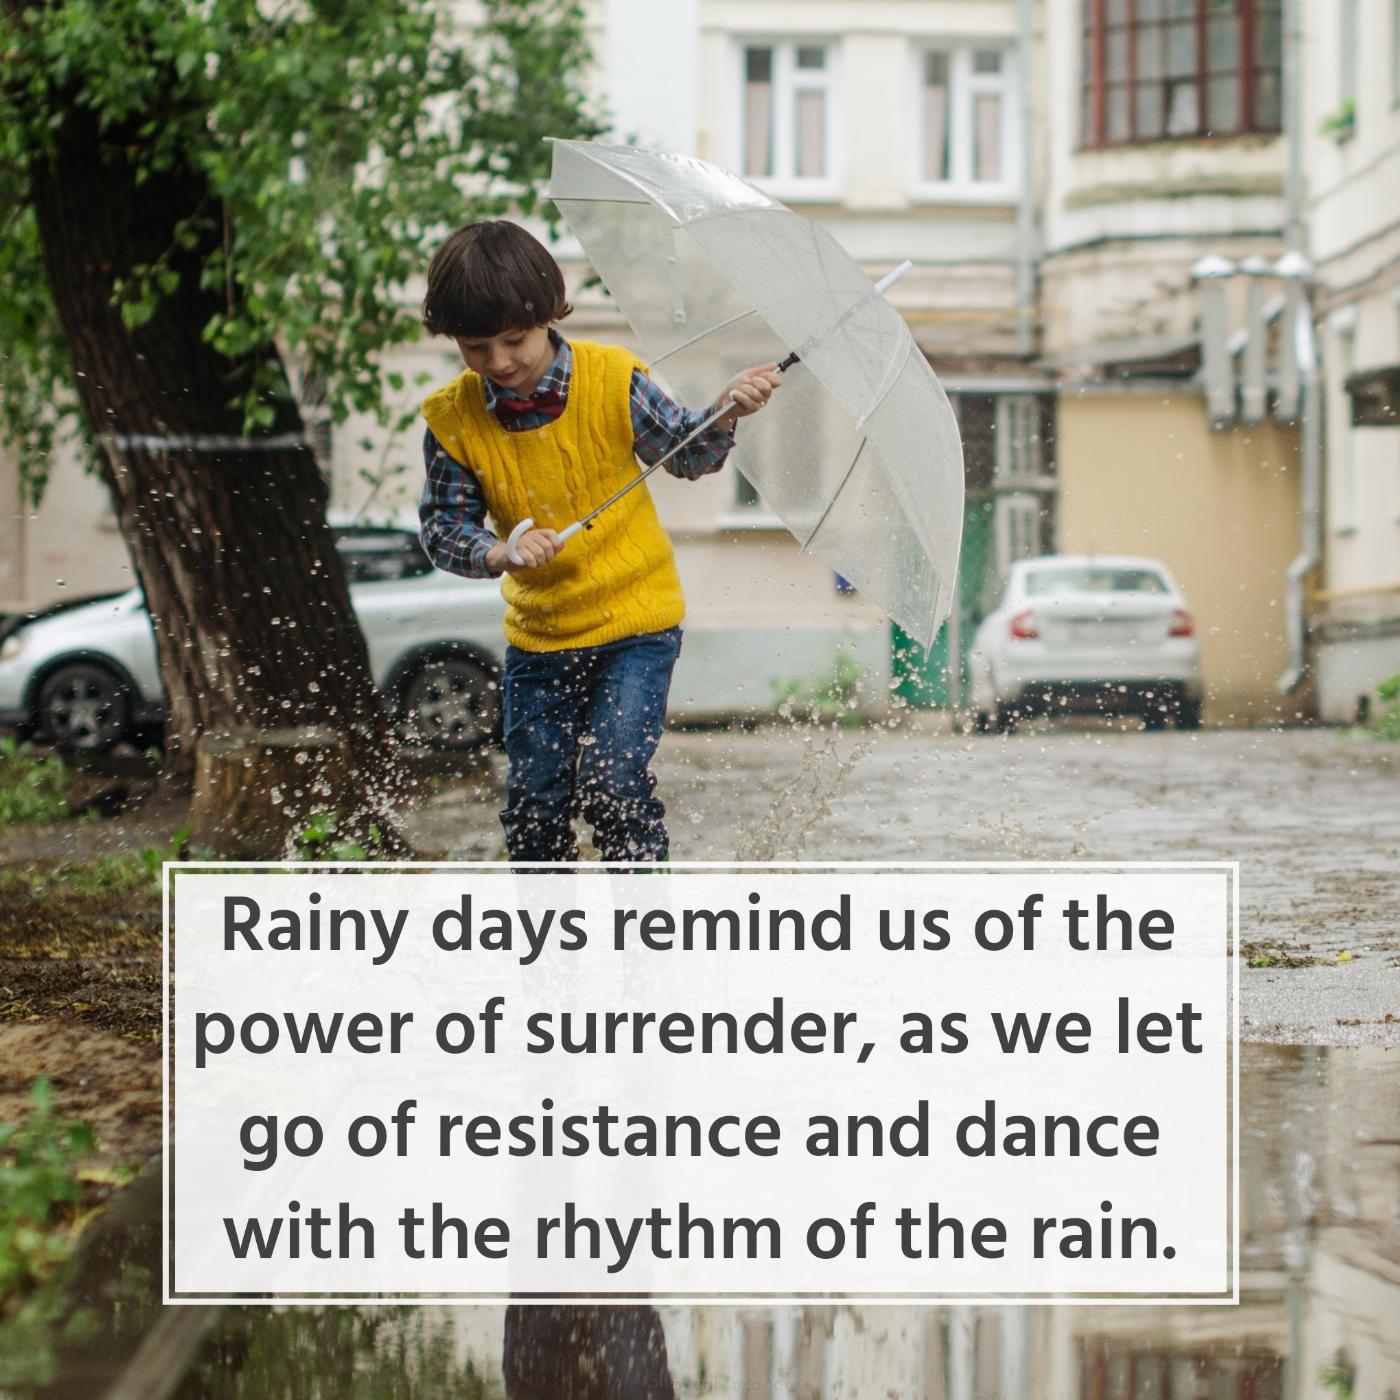 Rainy days remind us of the power of surrender